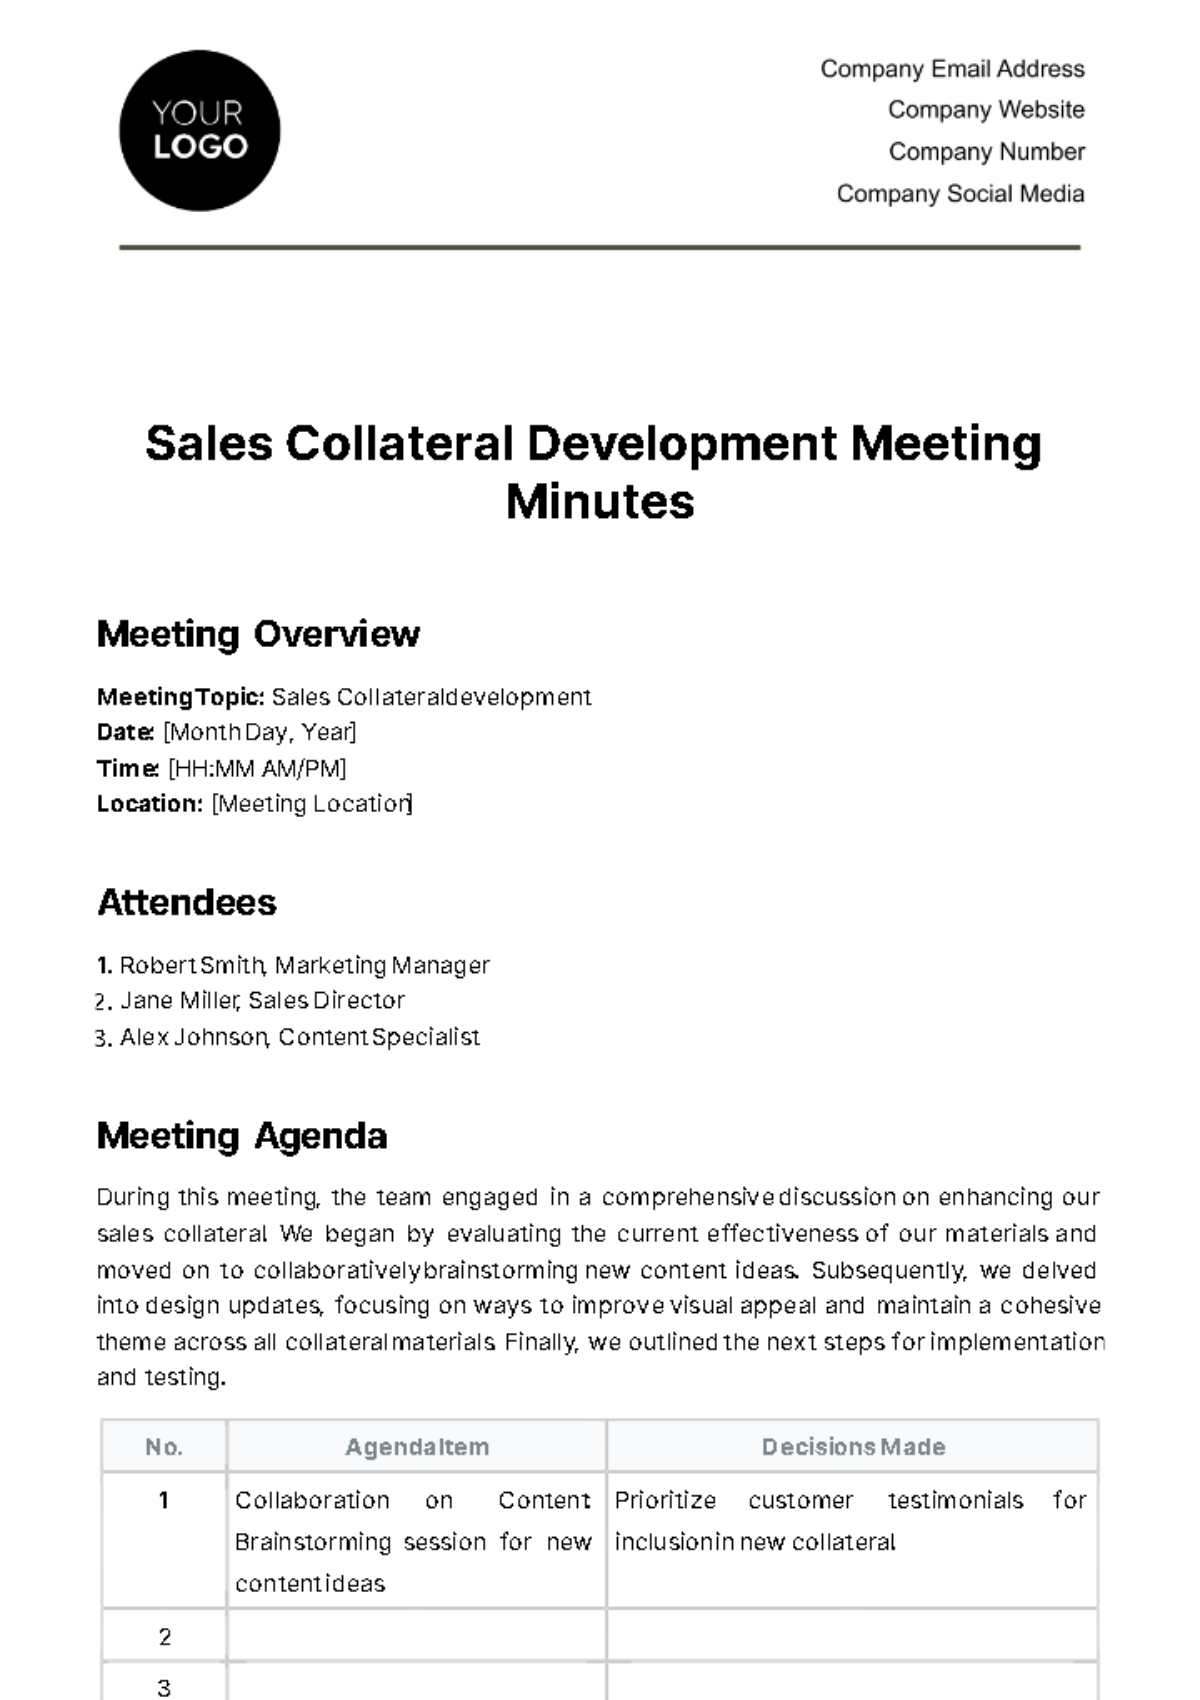 Sales Collateral Development Minute Template